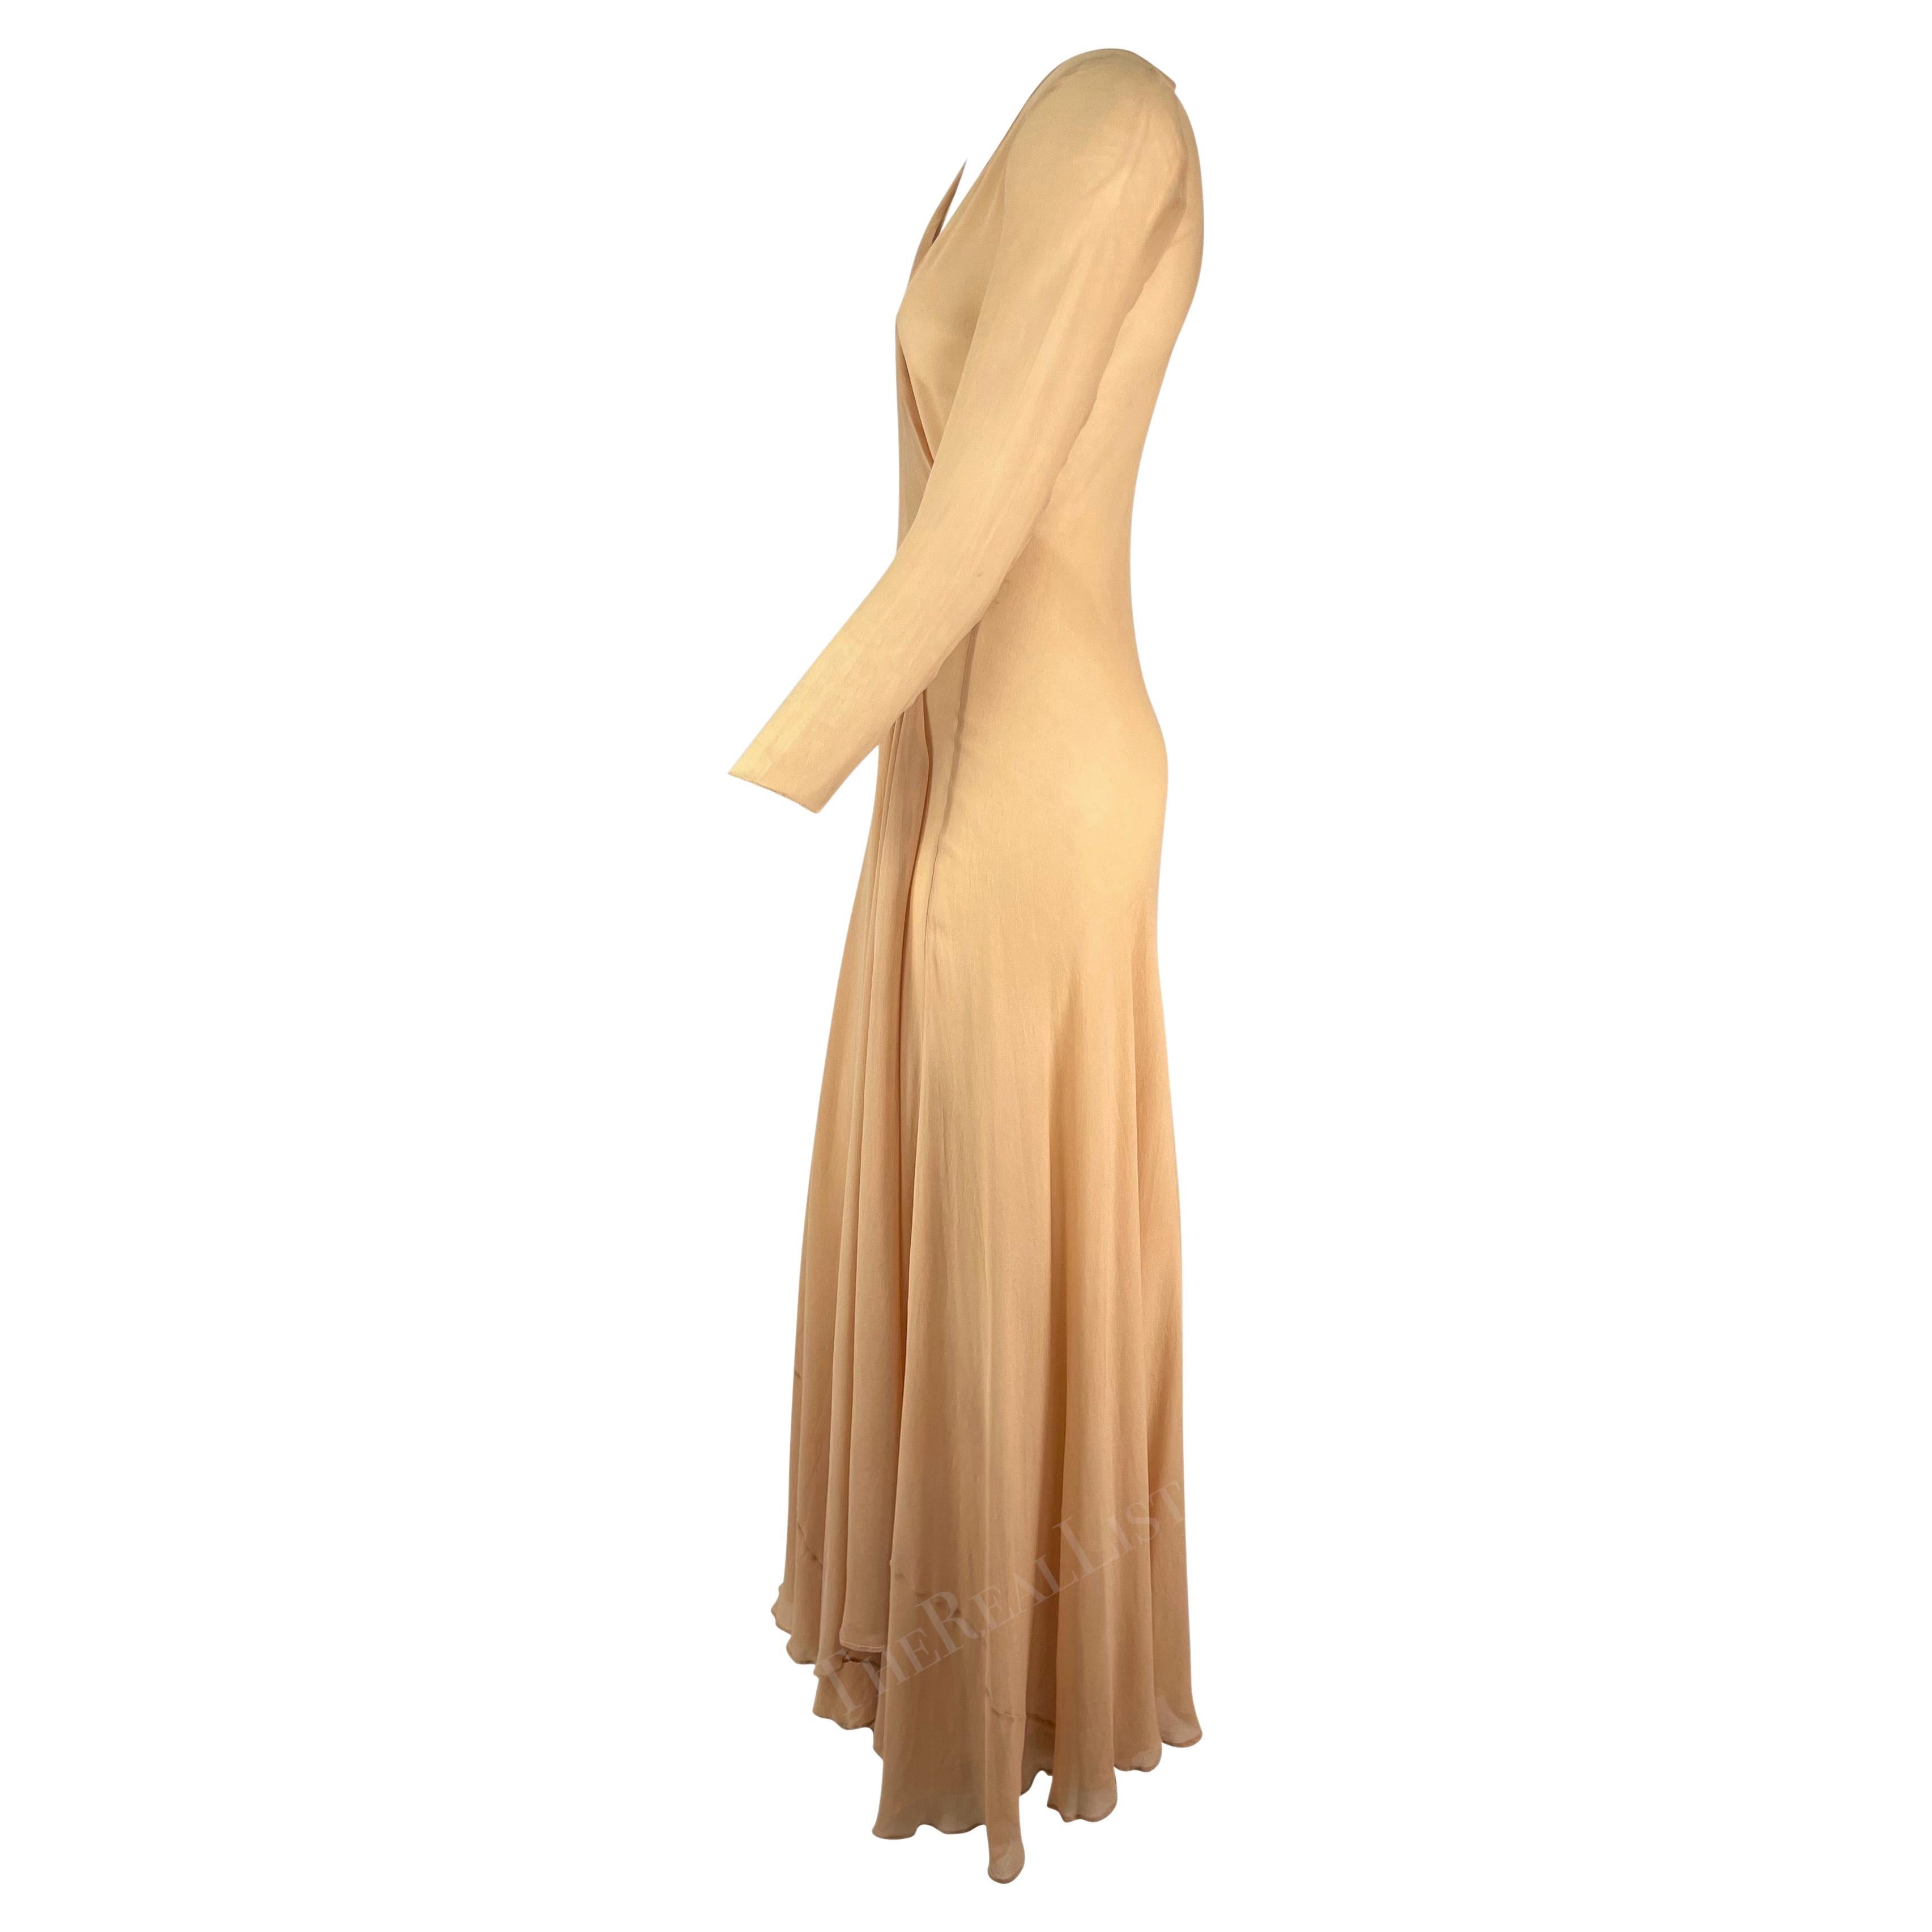 S/S 1998 Gucci by Tom Ford Beige Sheer Wrap Floor Length Sample Gown  In Excellent Condition For Sale In West Hollywood, CA